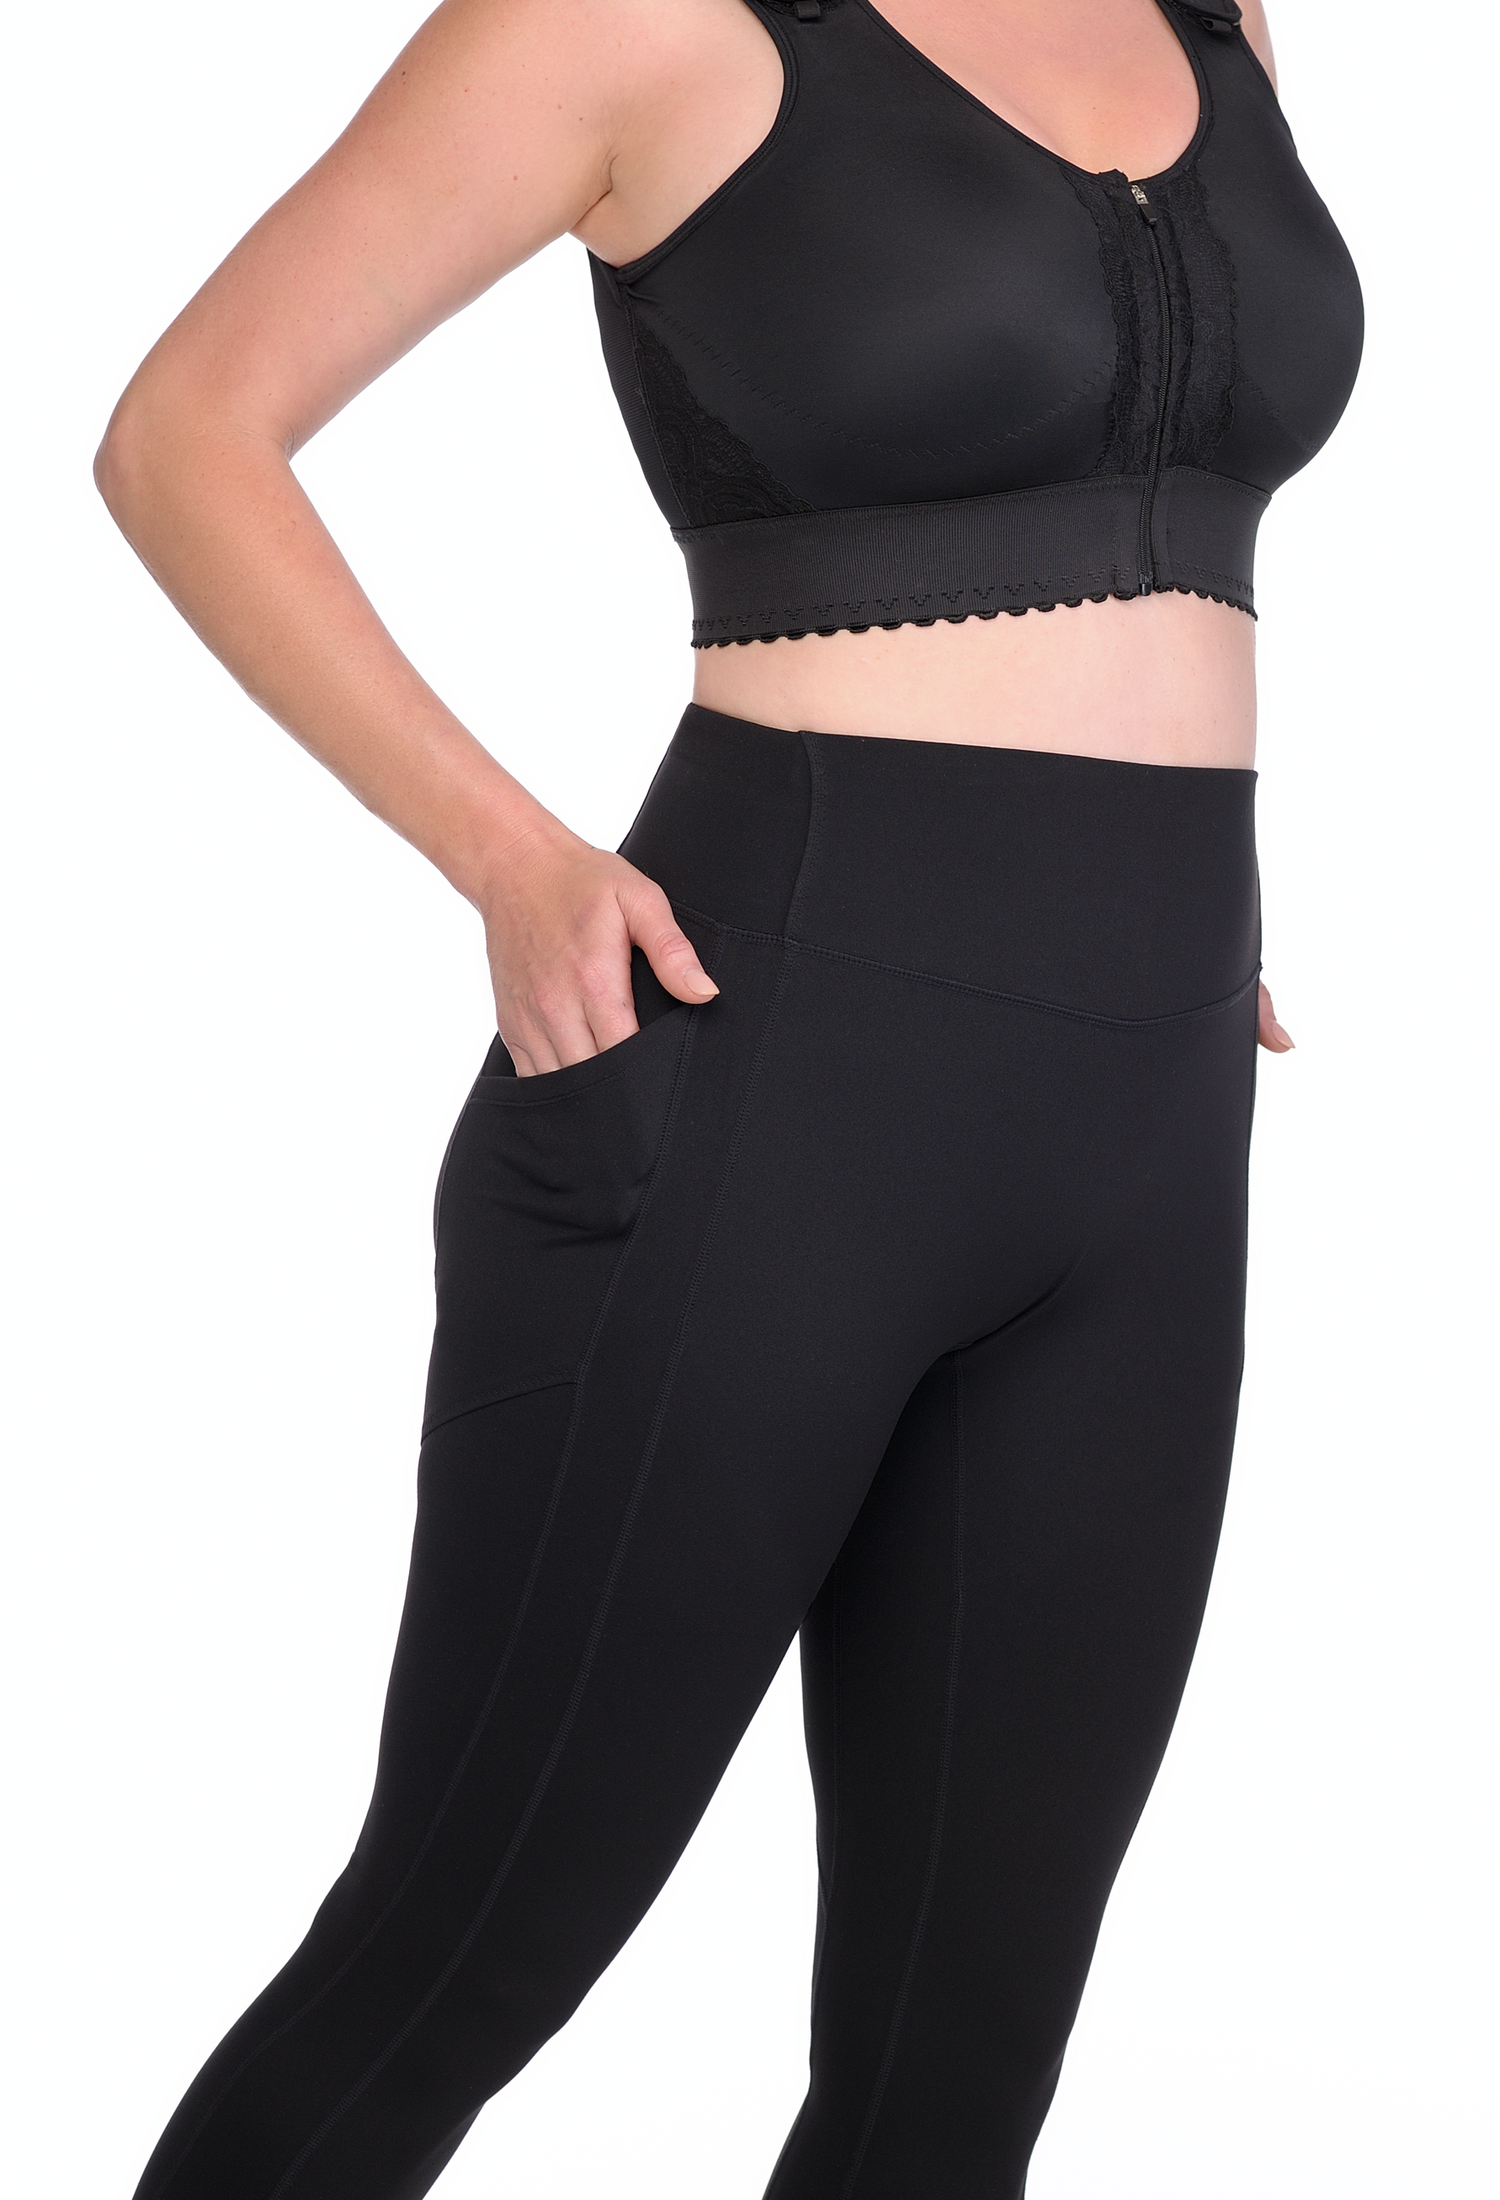 Ultimate Sports Compression Leggings, Firm High-Rise Panel with Pockets